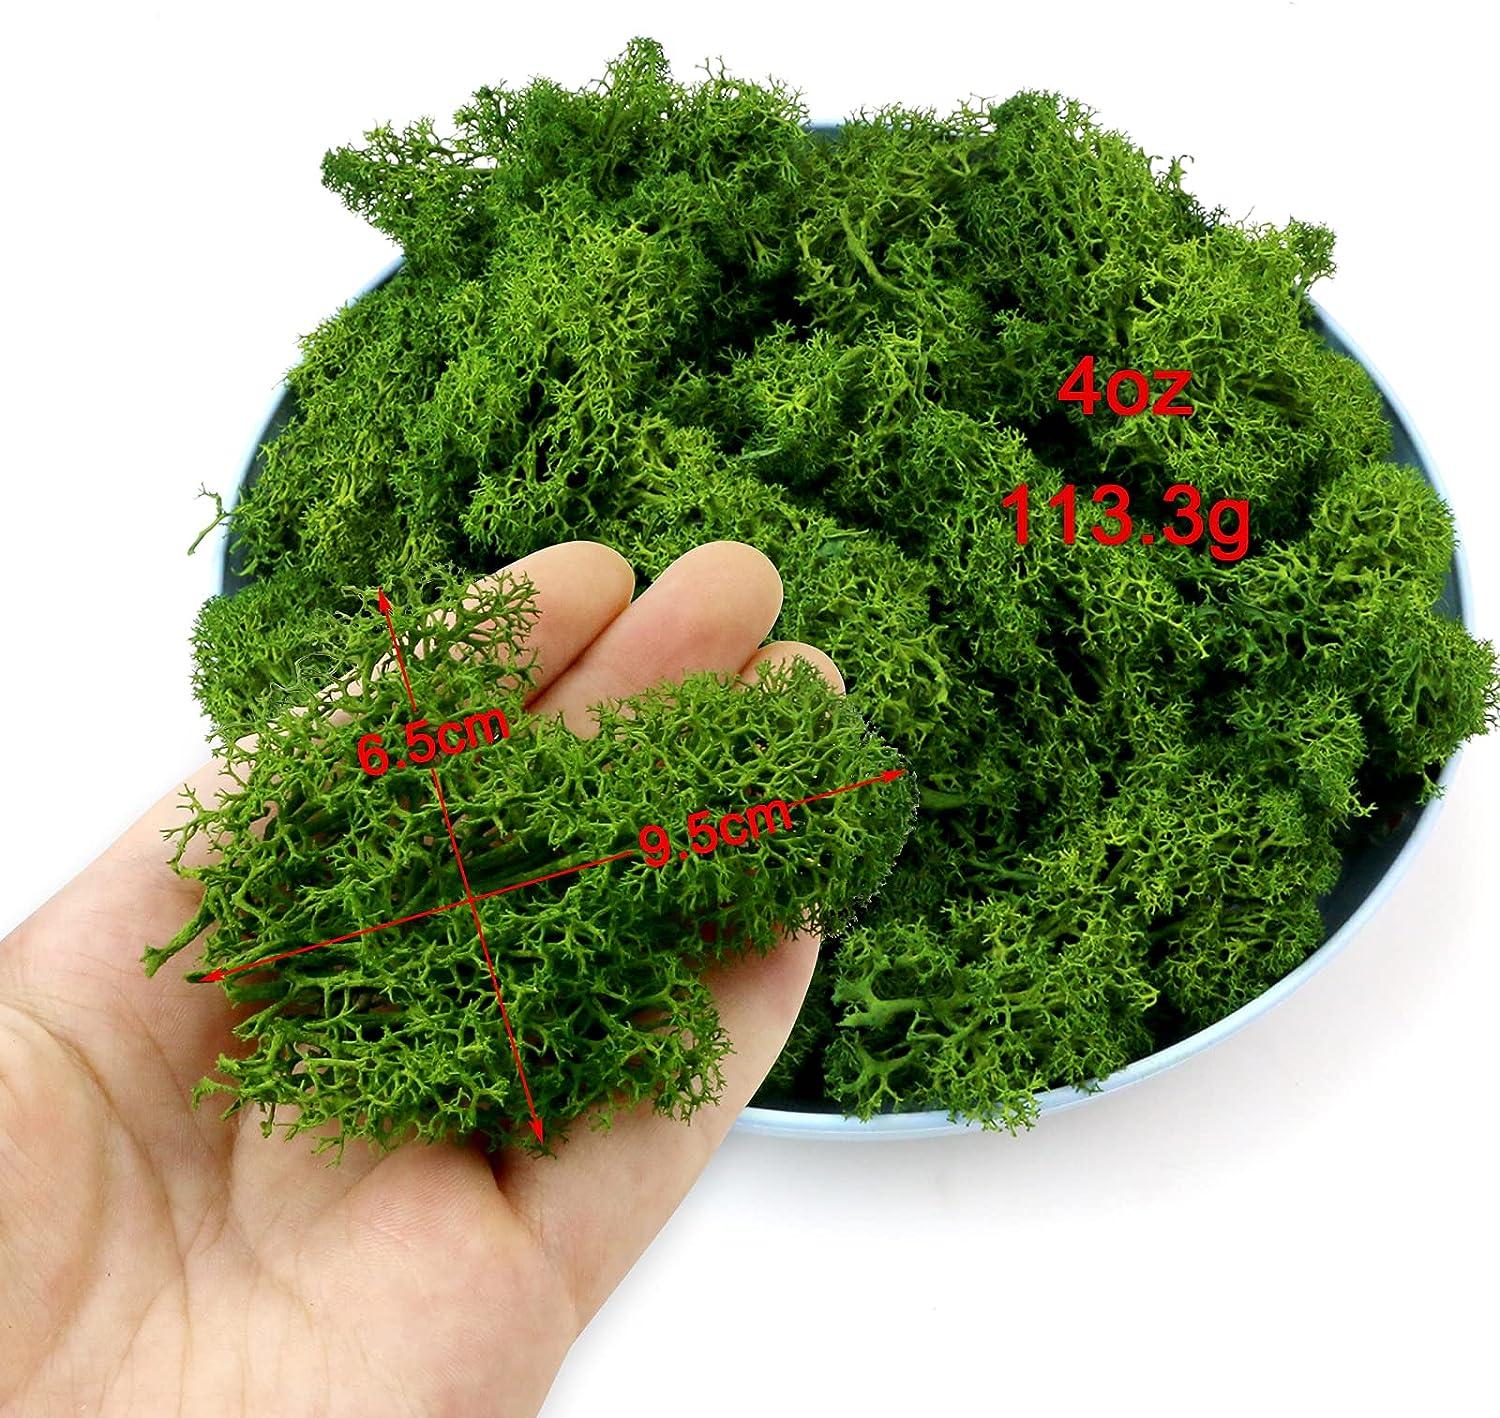 TKOnline Moss Preserved, Green Moss for Fairly Gardens, Preserved Moss for  Potted Plants, DIY Craft, Floral Project, Wedding, 4 OZ